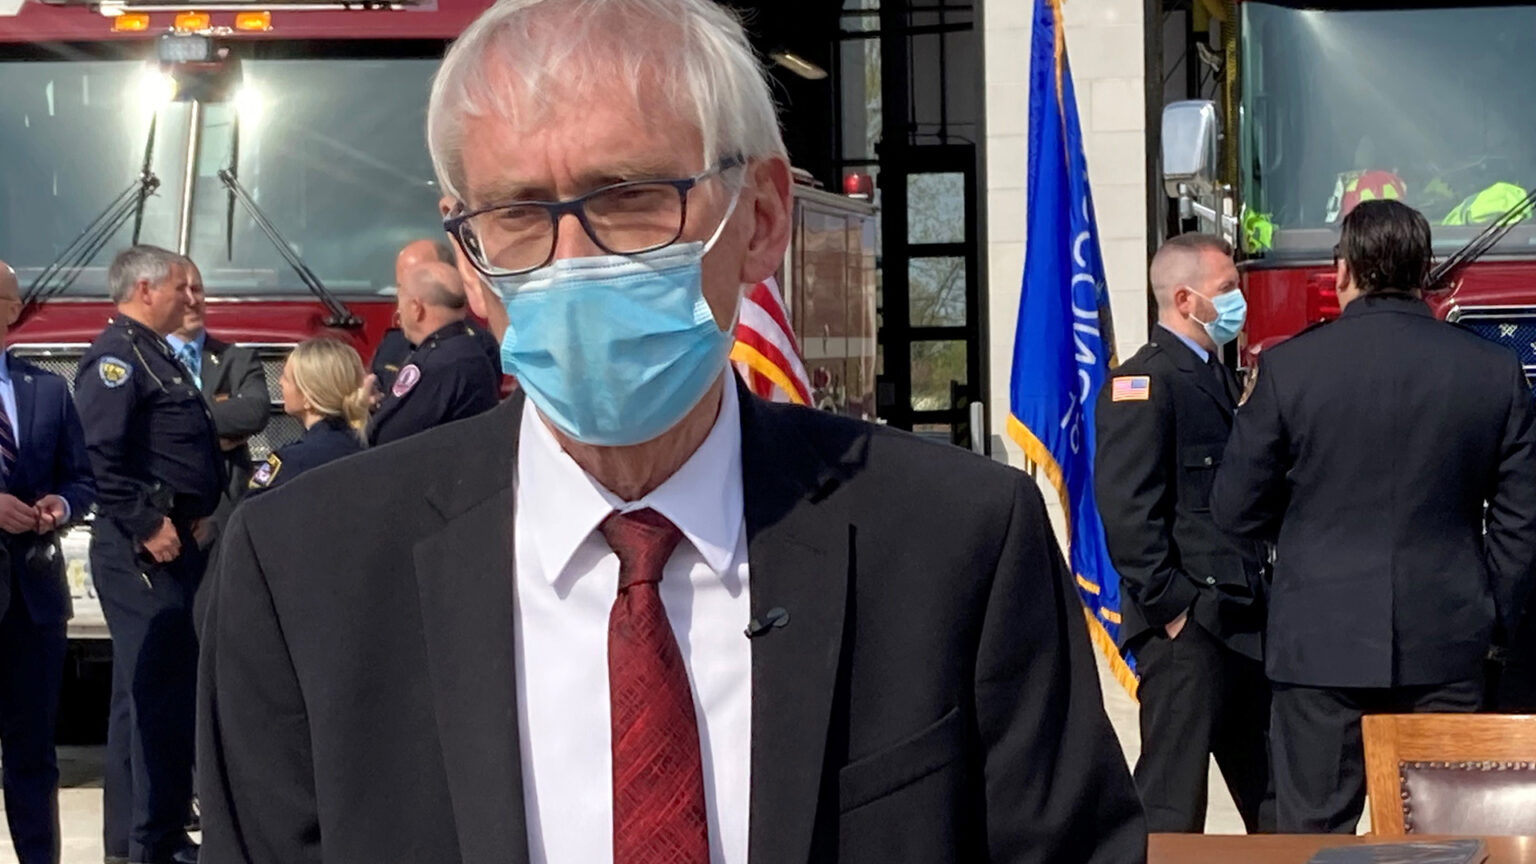 Tony Evers wears a medical face mask while standing in front of a table and chair set outside the garage doors of a fire station, with firefighters standing in the background alongside two parked fire engines and U.S. and Wisconsin flags.